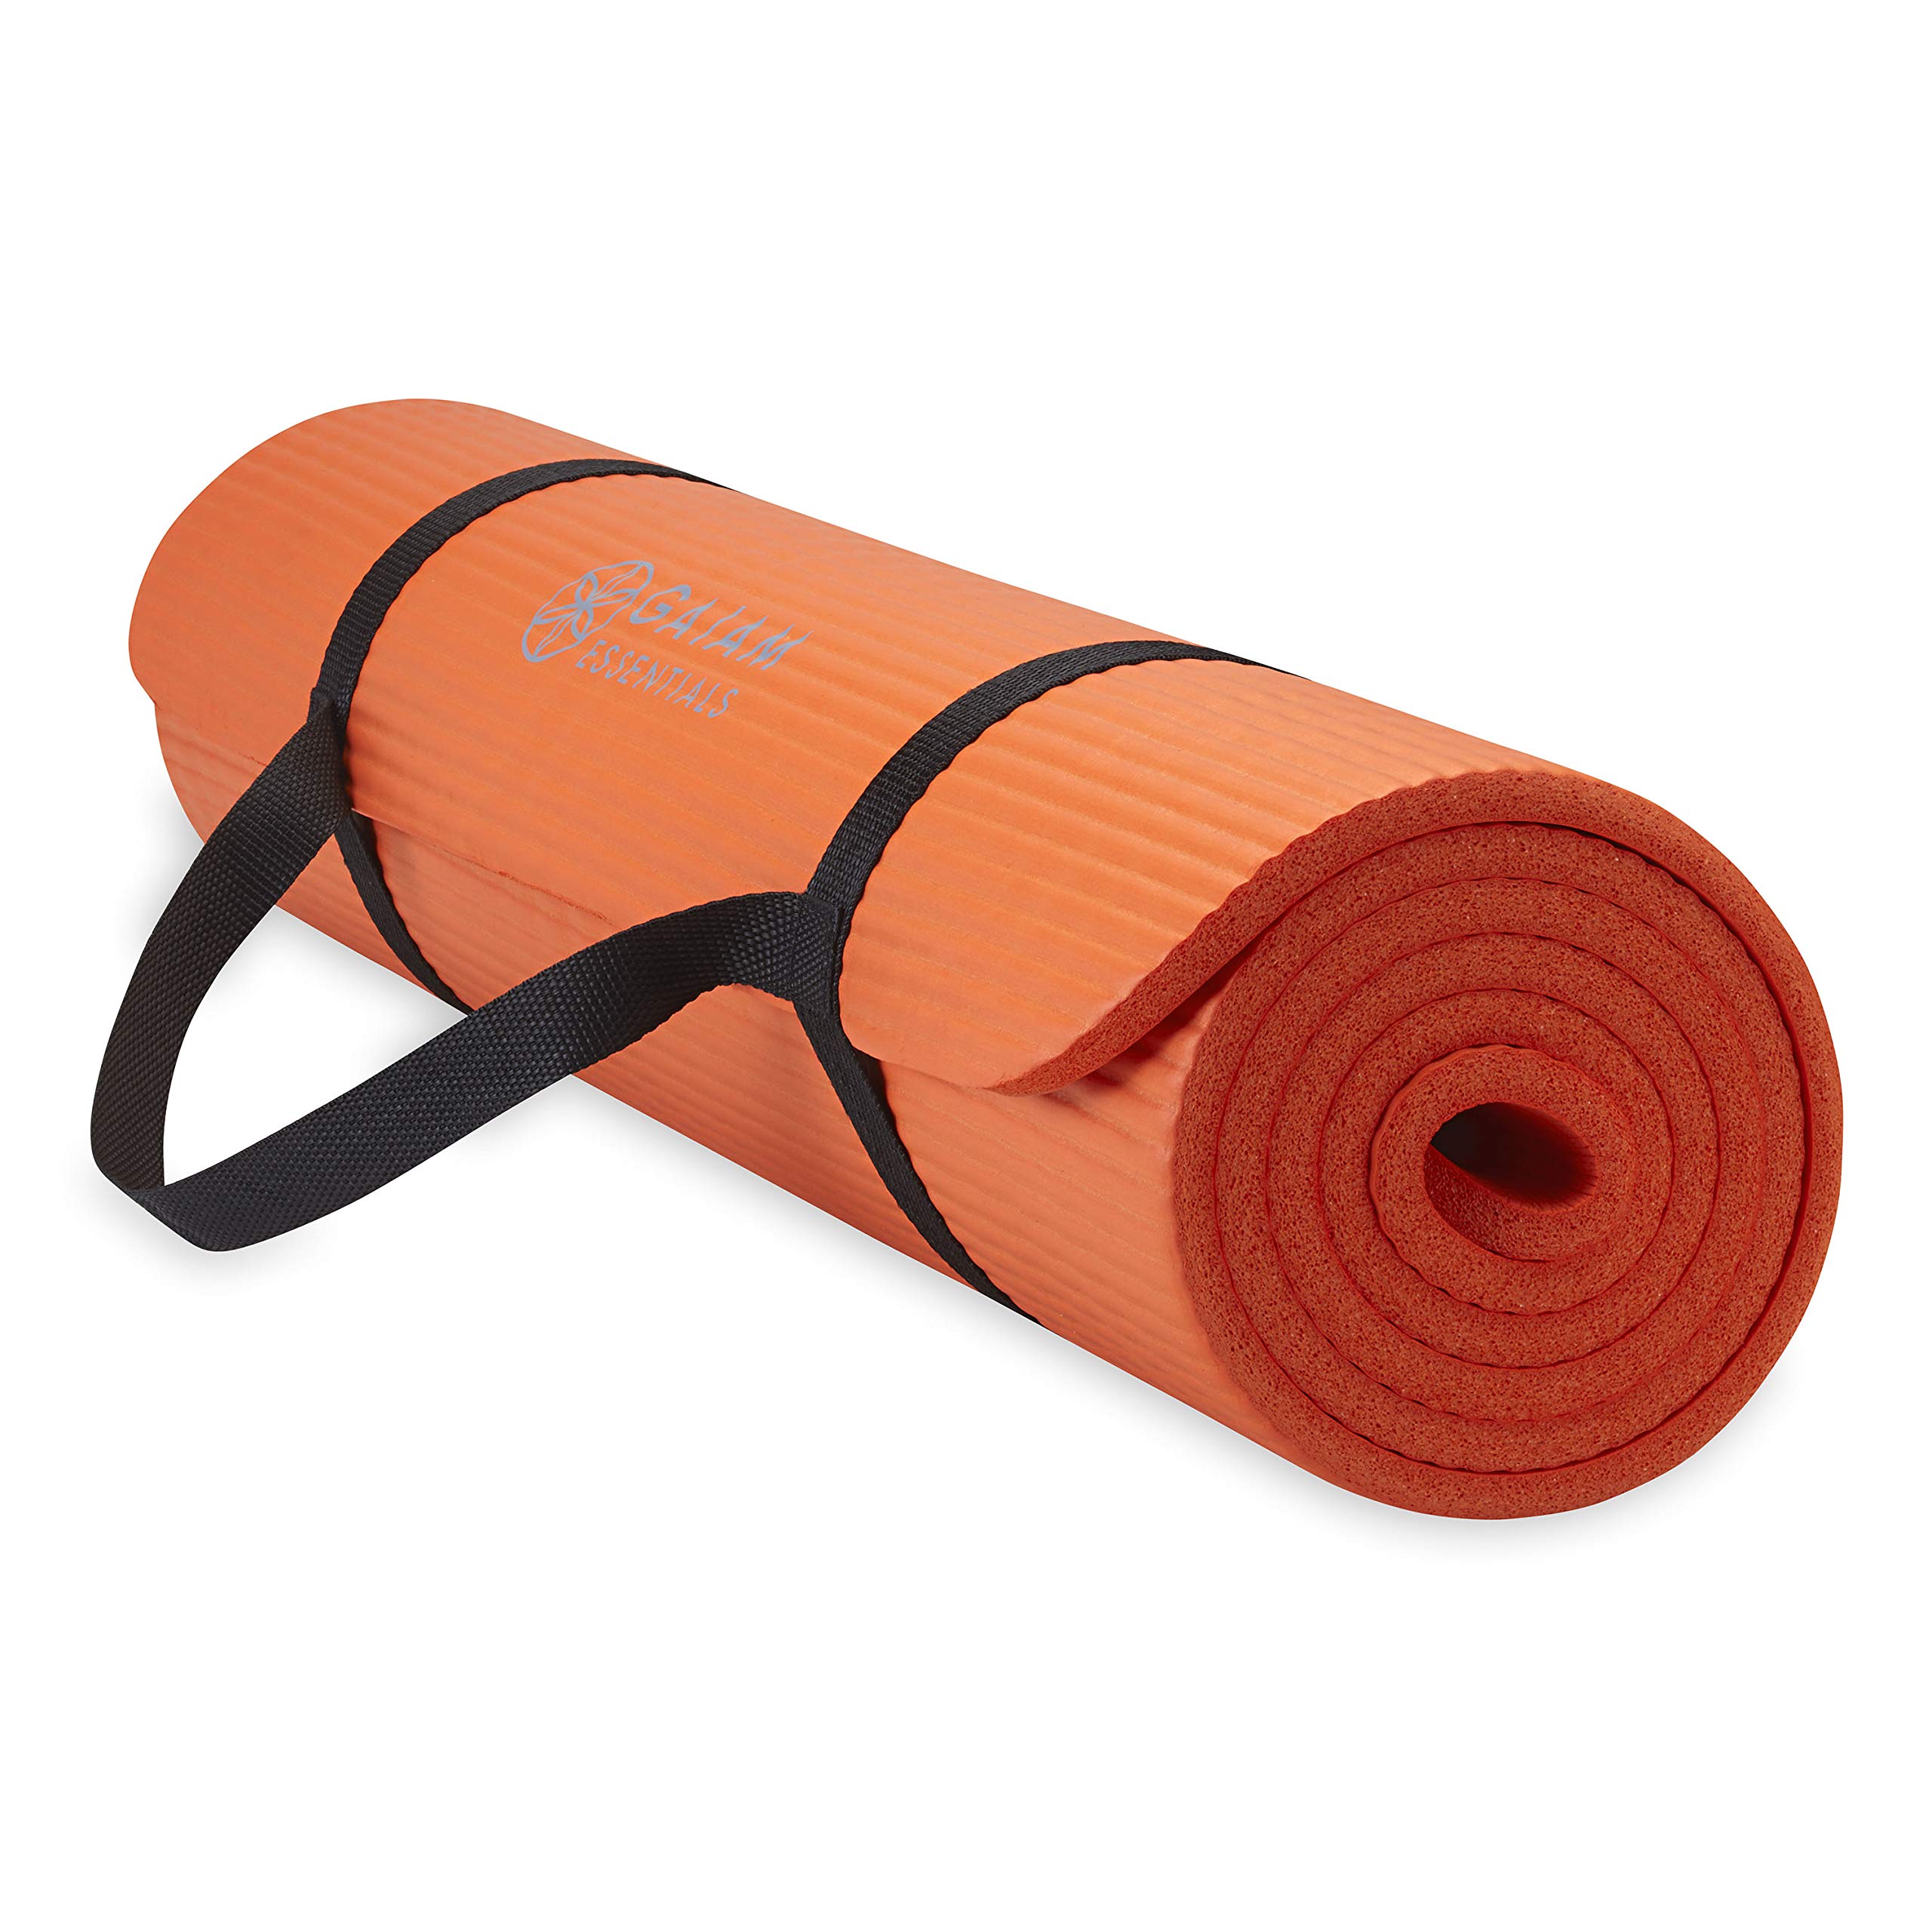 Gaiam Essentials Thick Yoga Mat Fitness & Exercise Mat with Easy-Cinch Yoga  Mat Carrier Strap, 72L x 24W x 2/5 Inch Thick Orange